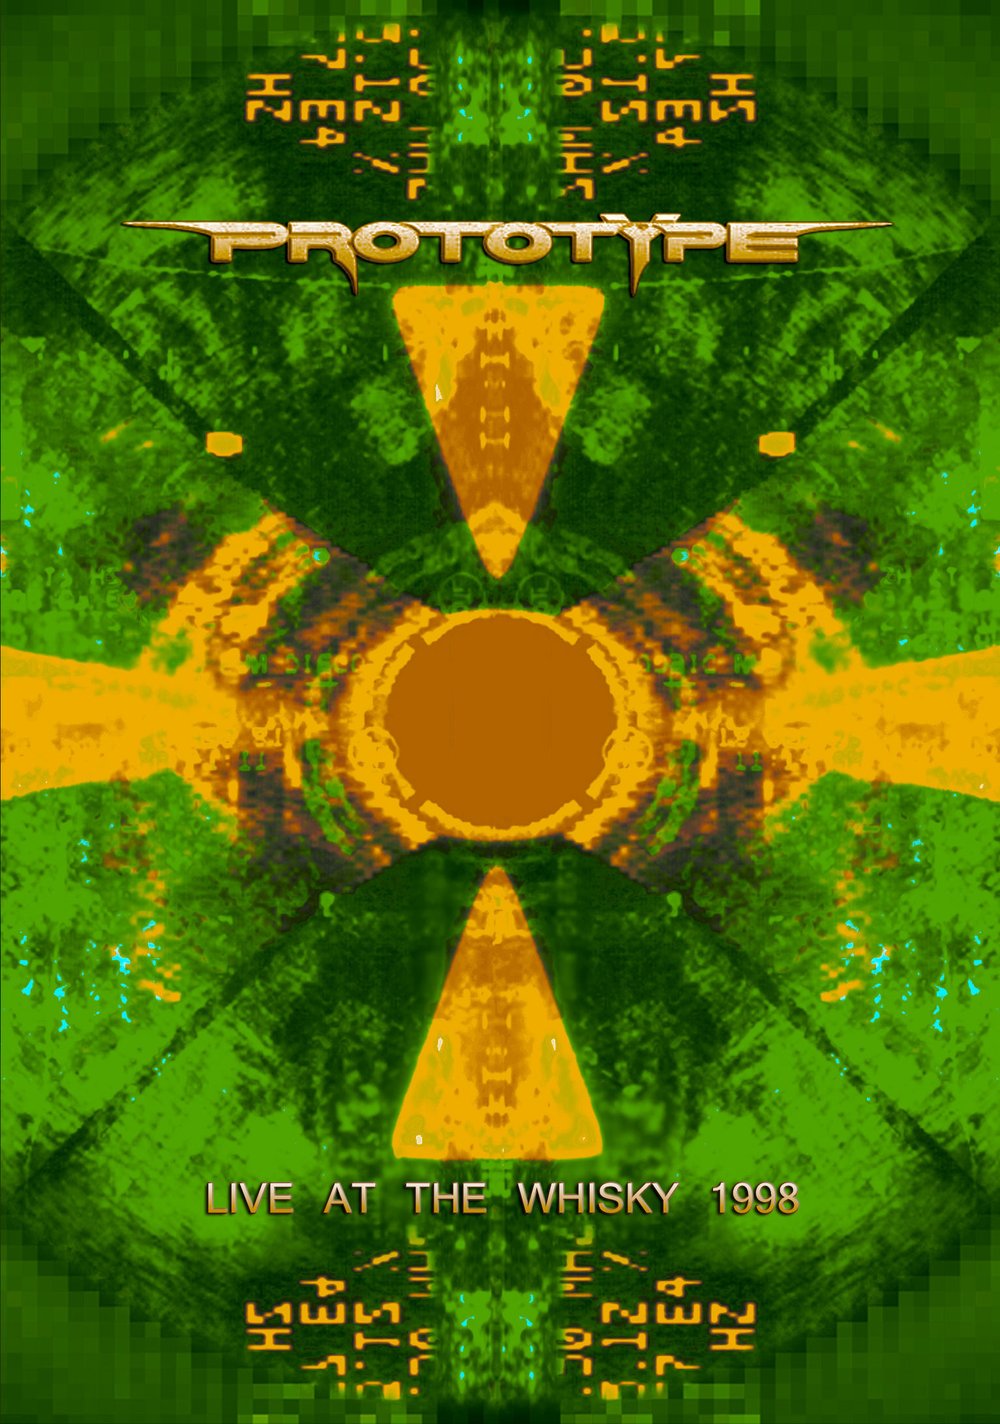 Prototype - Live At The Whisky 1998 (DVD-R)